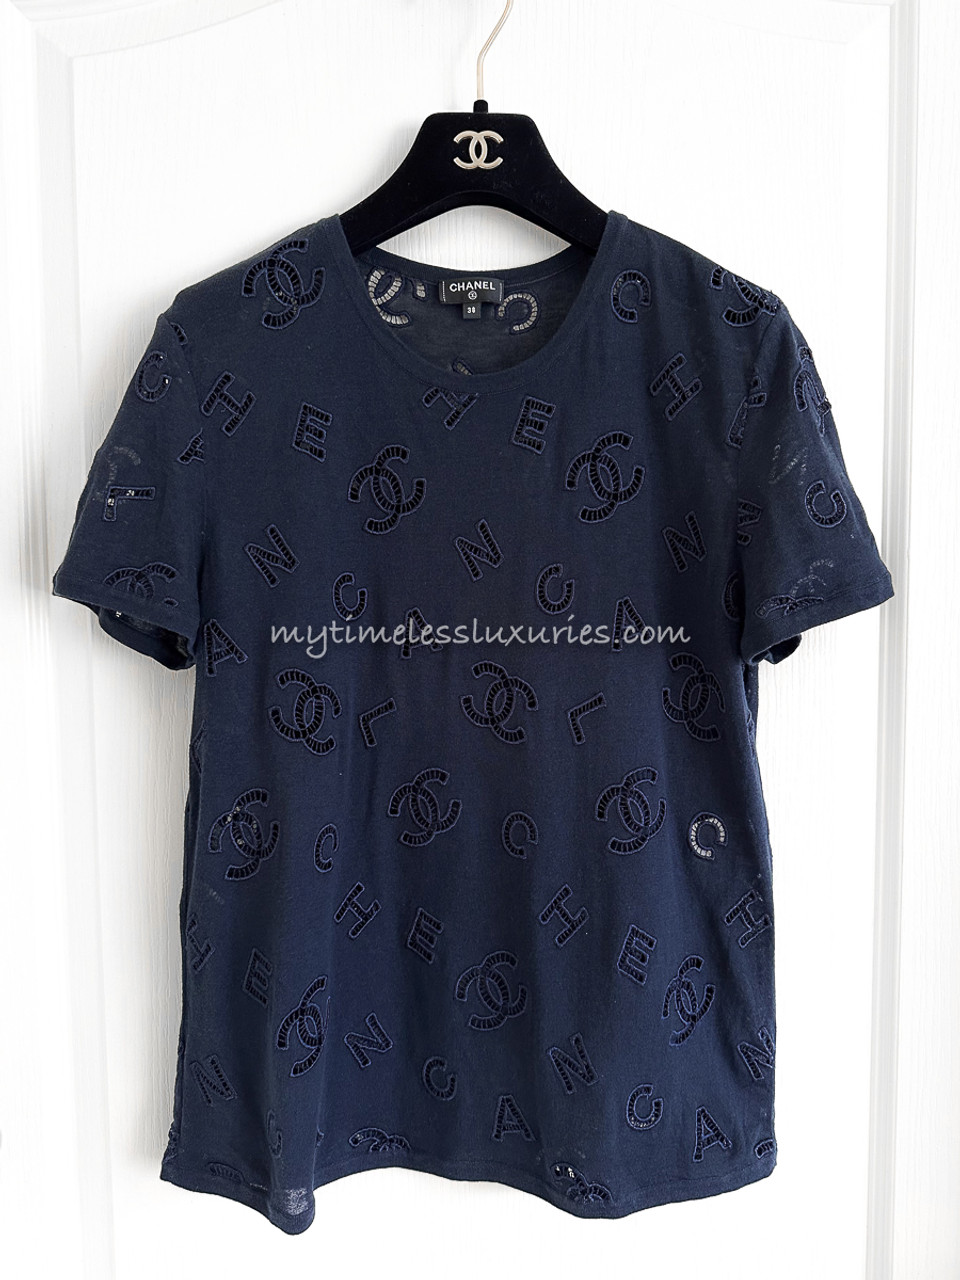 CHANEL 20C Logo T-Shirt 38 Navy - Timeless Luxuries